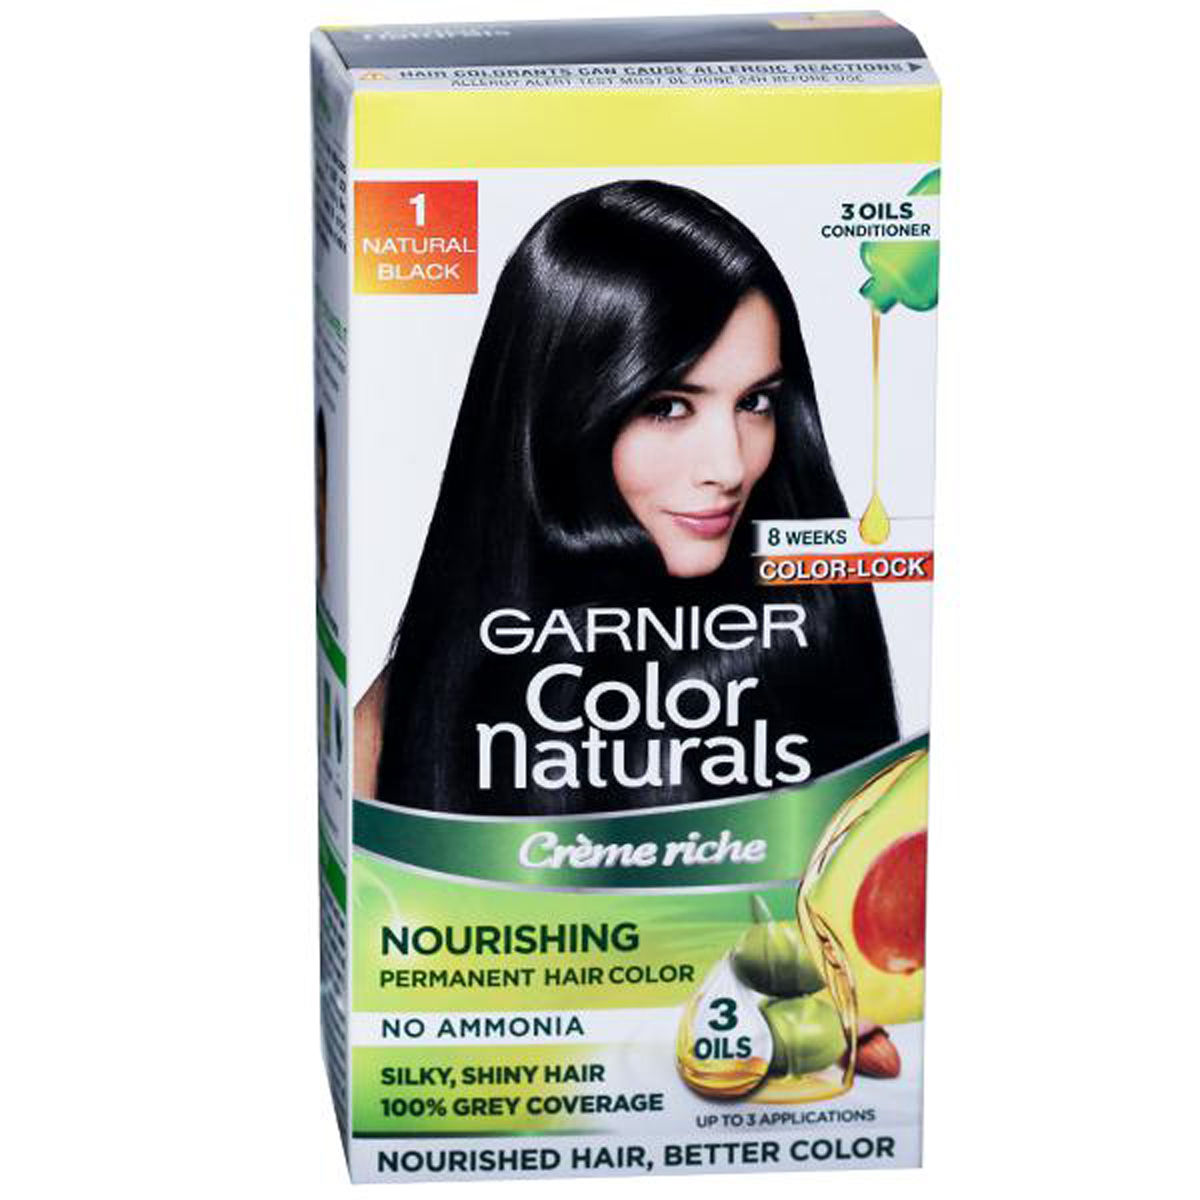 Garnier Color Naturals Creme Hair Color  5 Light Brown  Buy Garnier Color  Naturals Creme Hair Color  5 Light Brown Online at Best Price in India   Planet Health